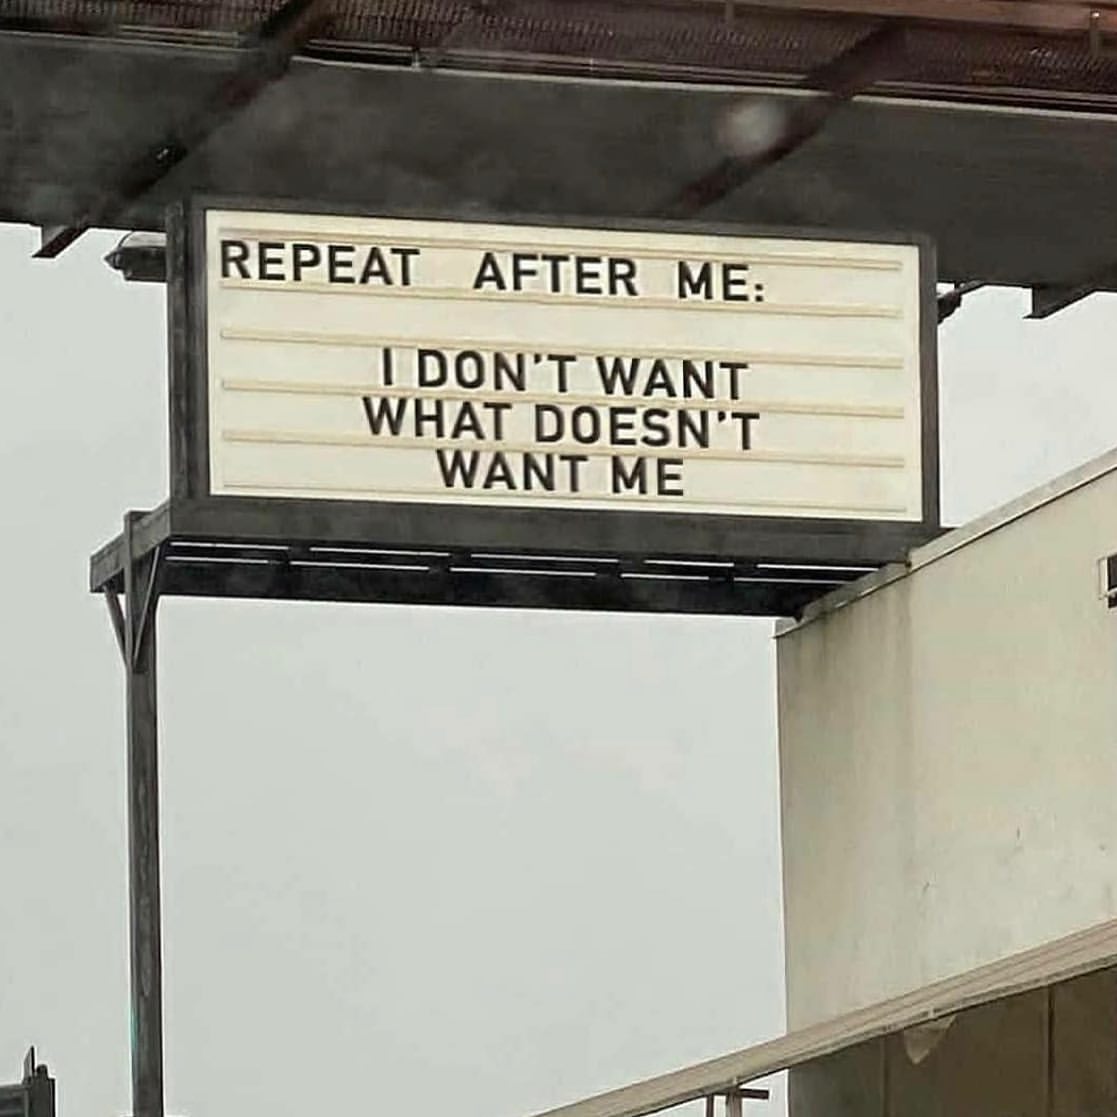 Repeat after me: I don't want what doesn't want me.